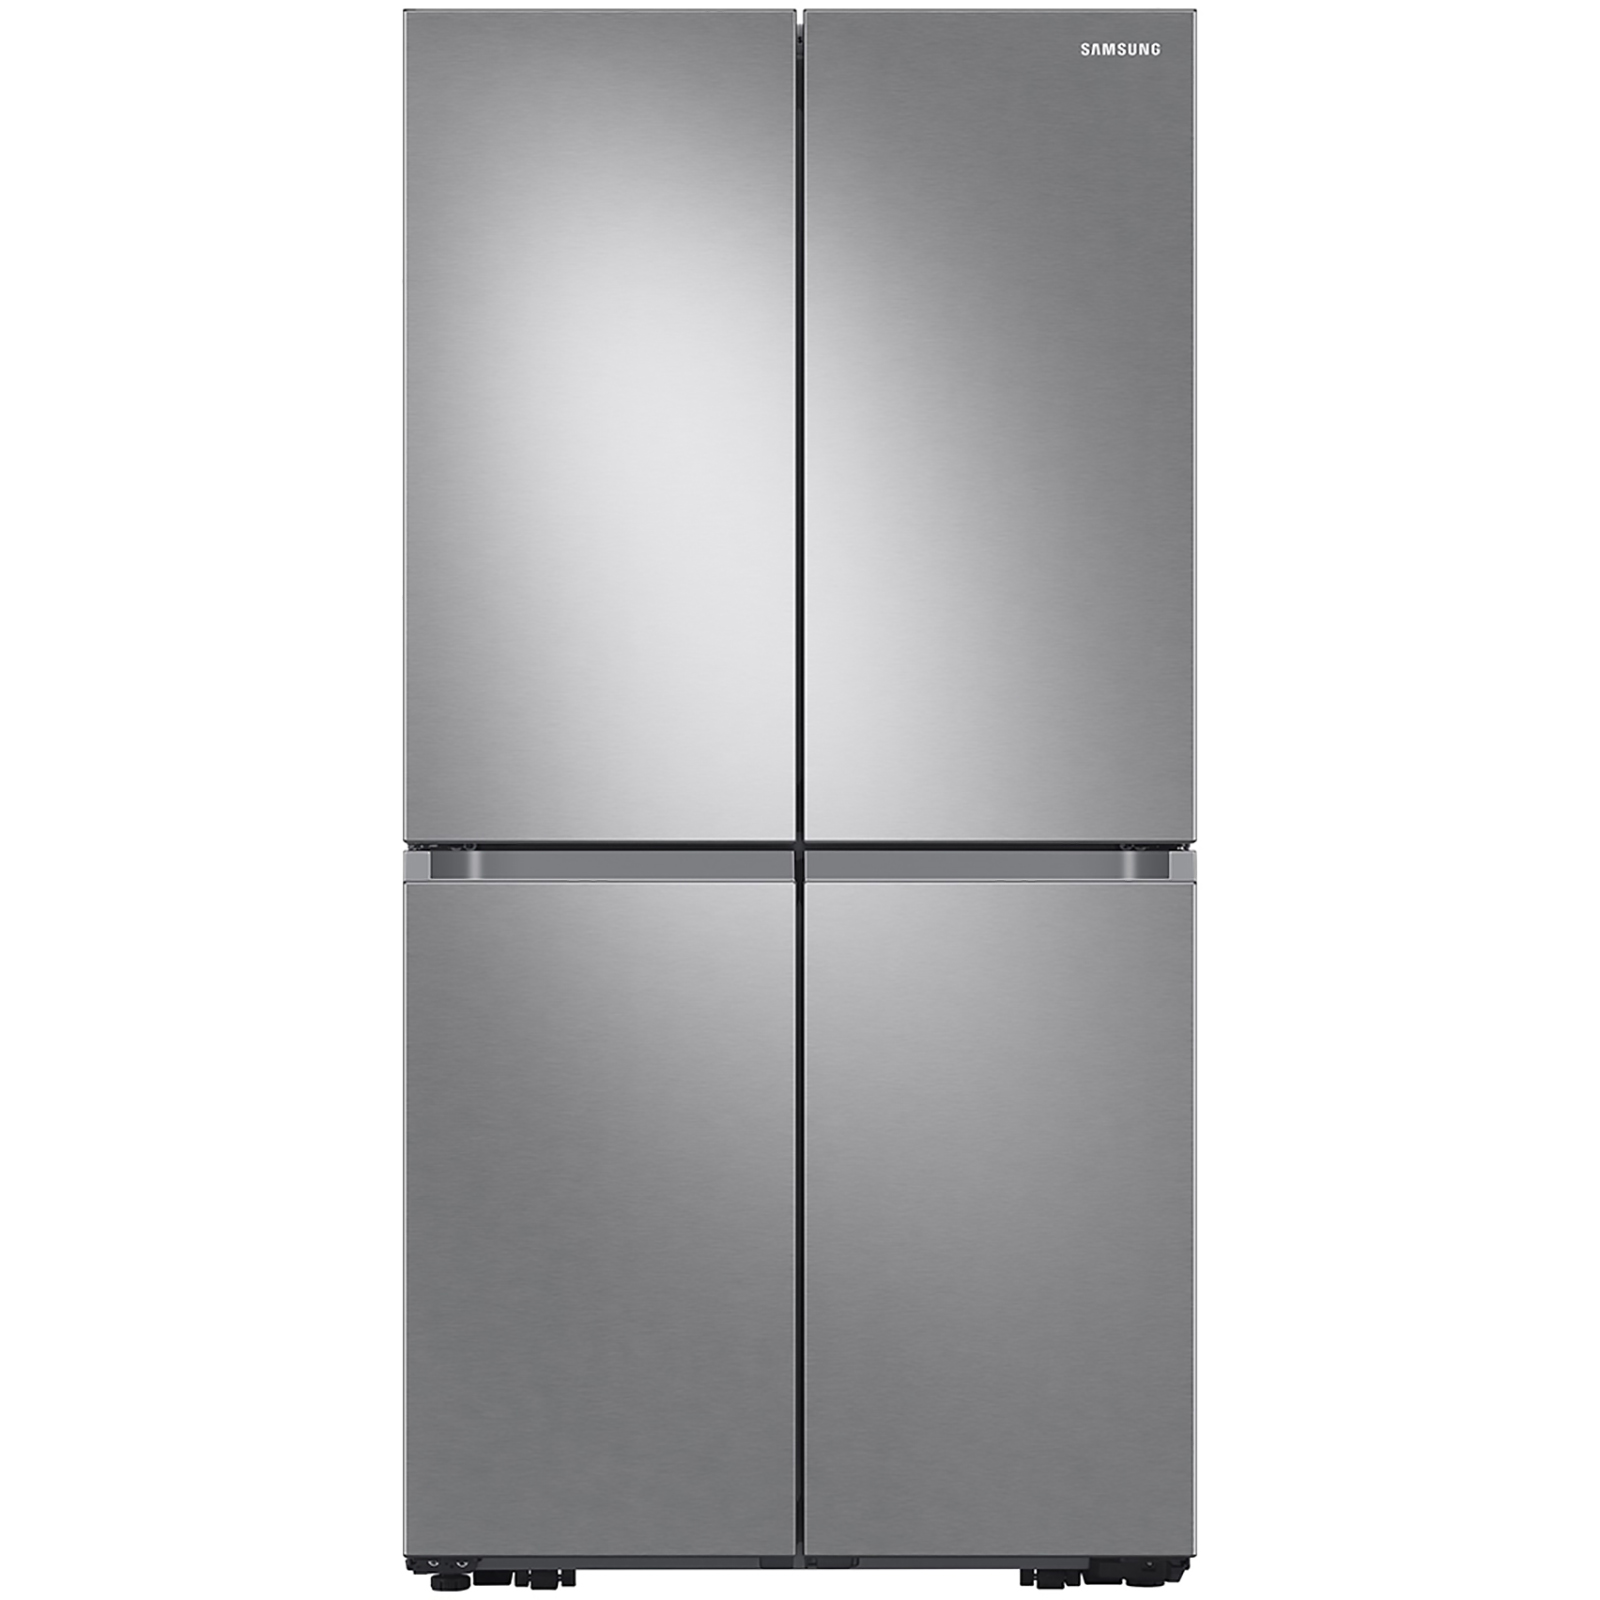 Samsung RF23A9071SR  23 cu. ft. Smart Counter Depth 4-Door Flex refrigerator with AutoFill Water Pitcher and Dual Ice Maker